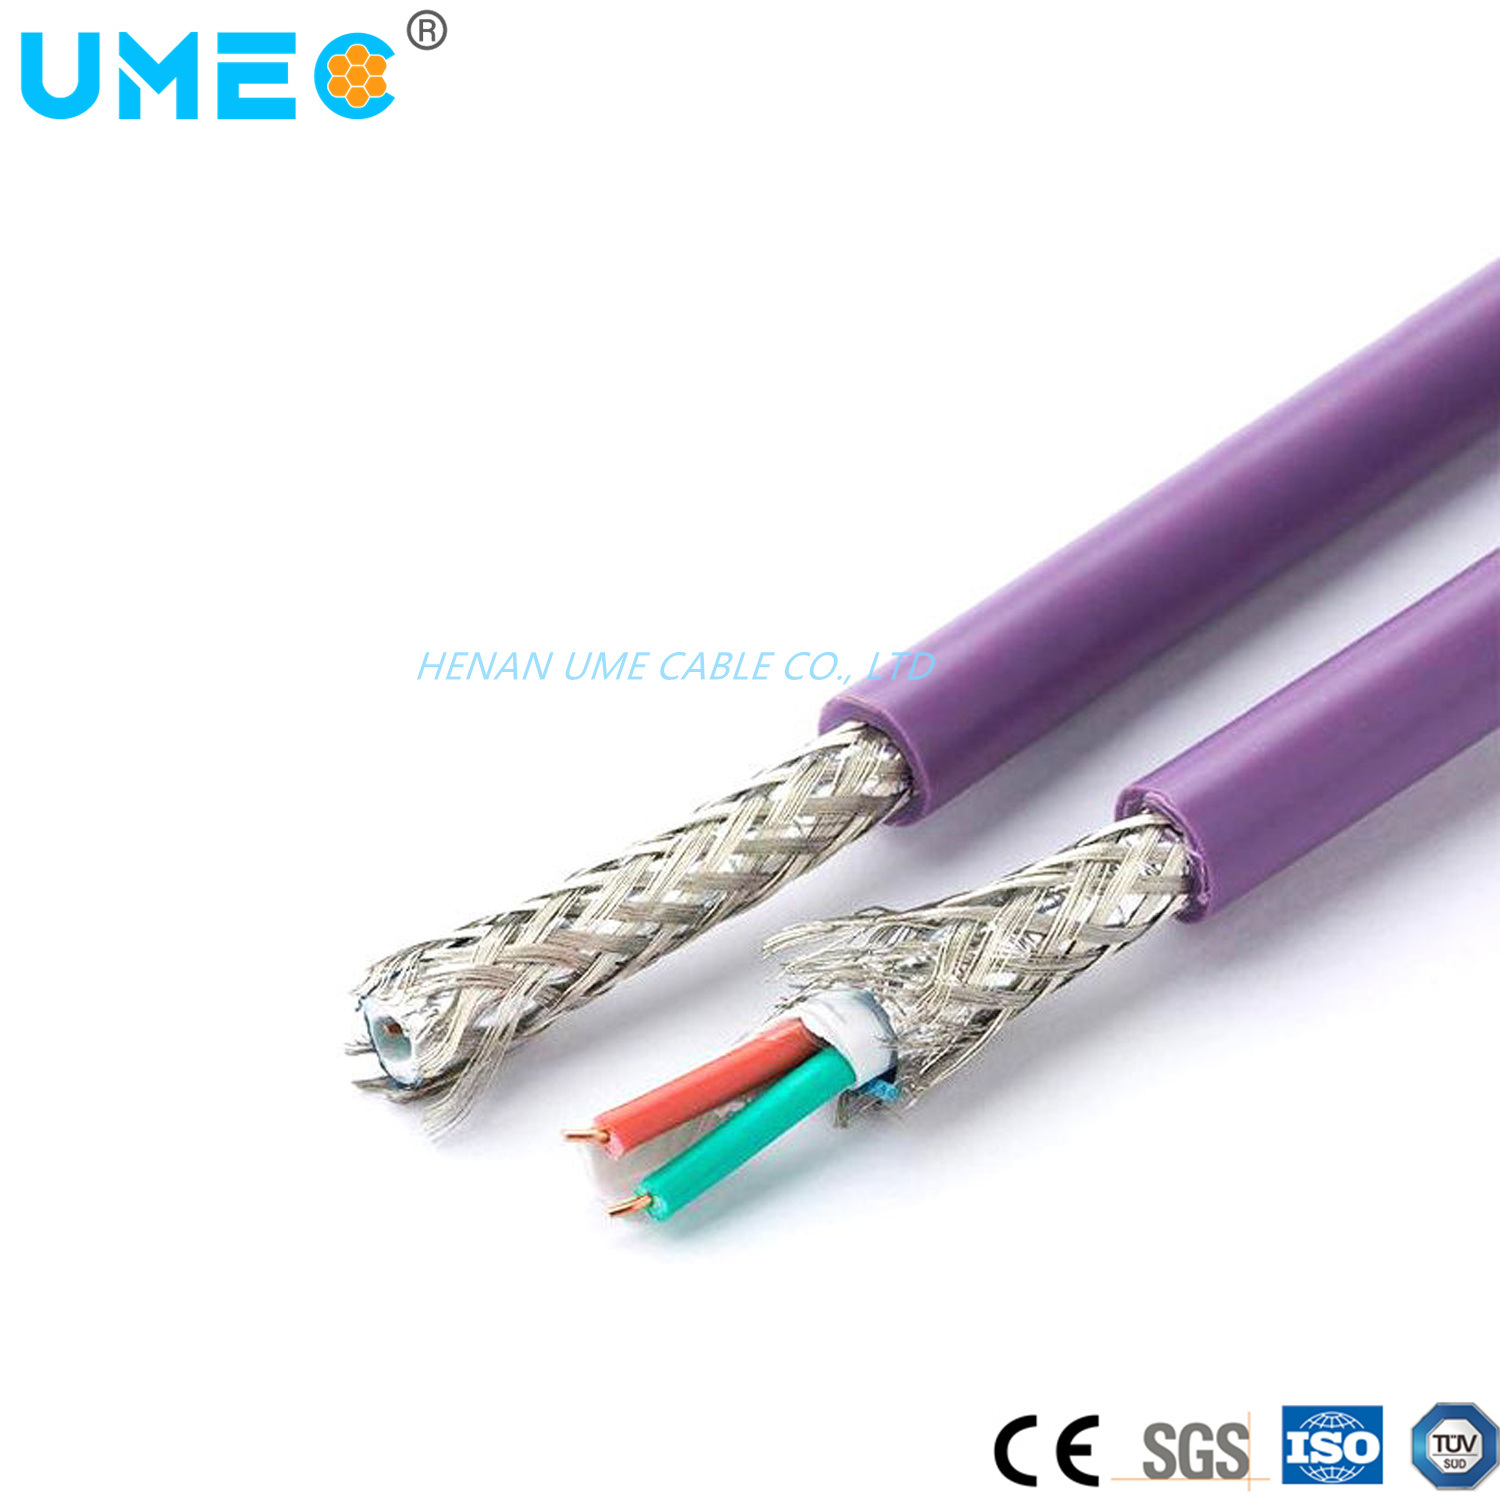 Stranded Copper Cable Flexible Field Communication Cable 6xv1830-0eh10 Cable